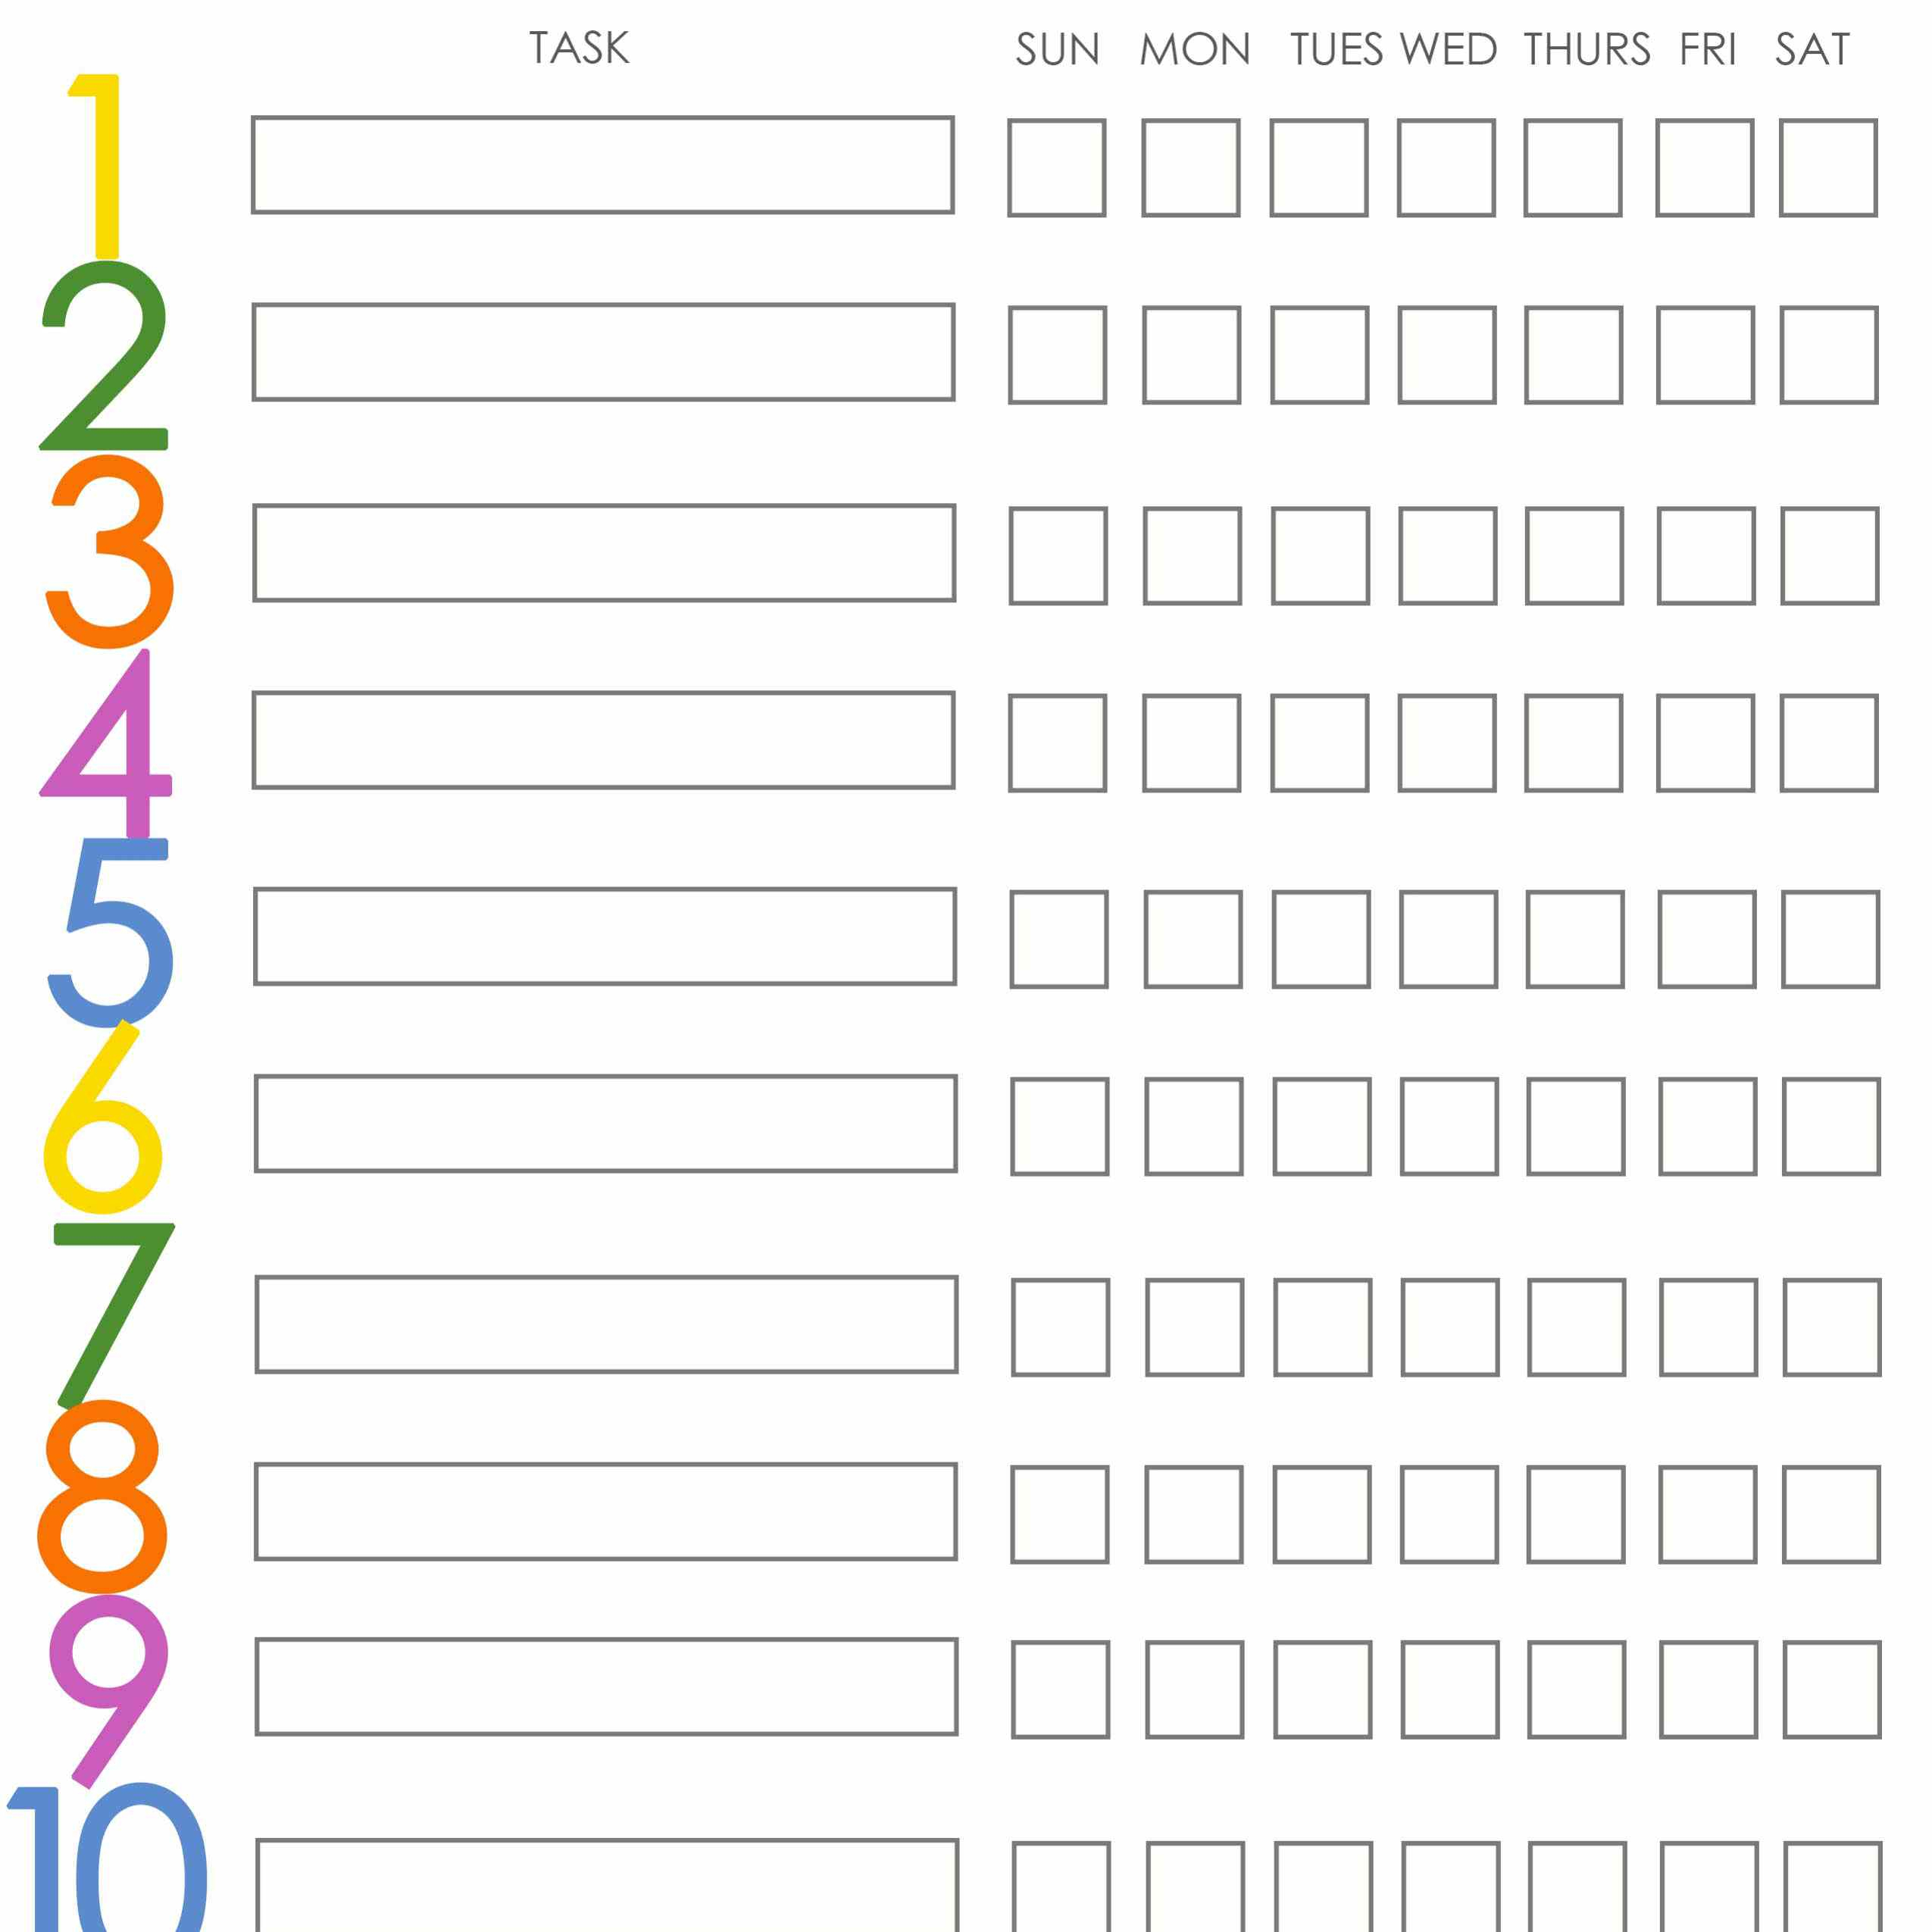 Free Printable Weekly Chore Charts - Free Printable Chore Charts For 7 Year Olds